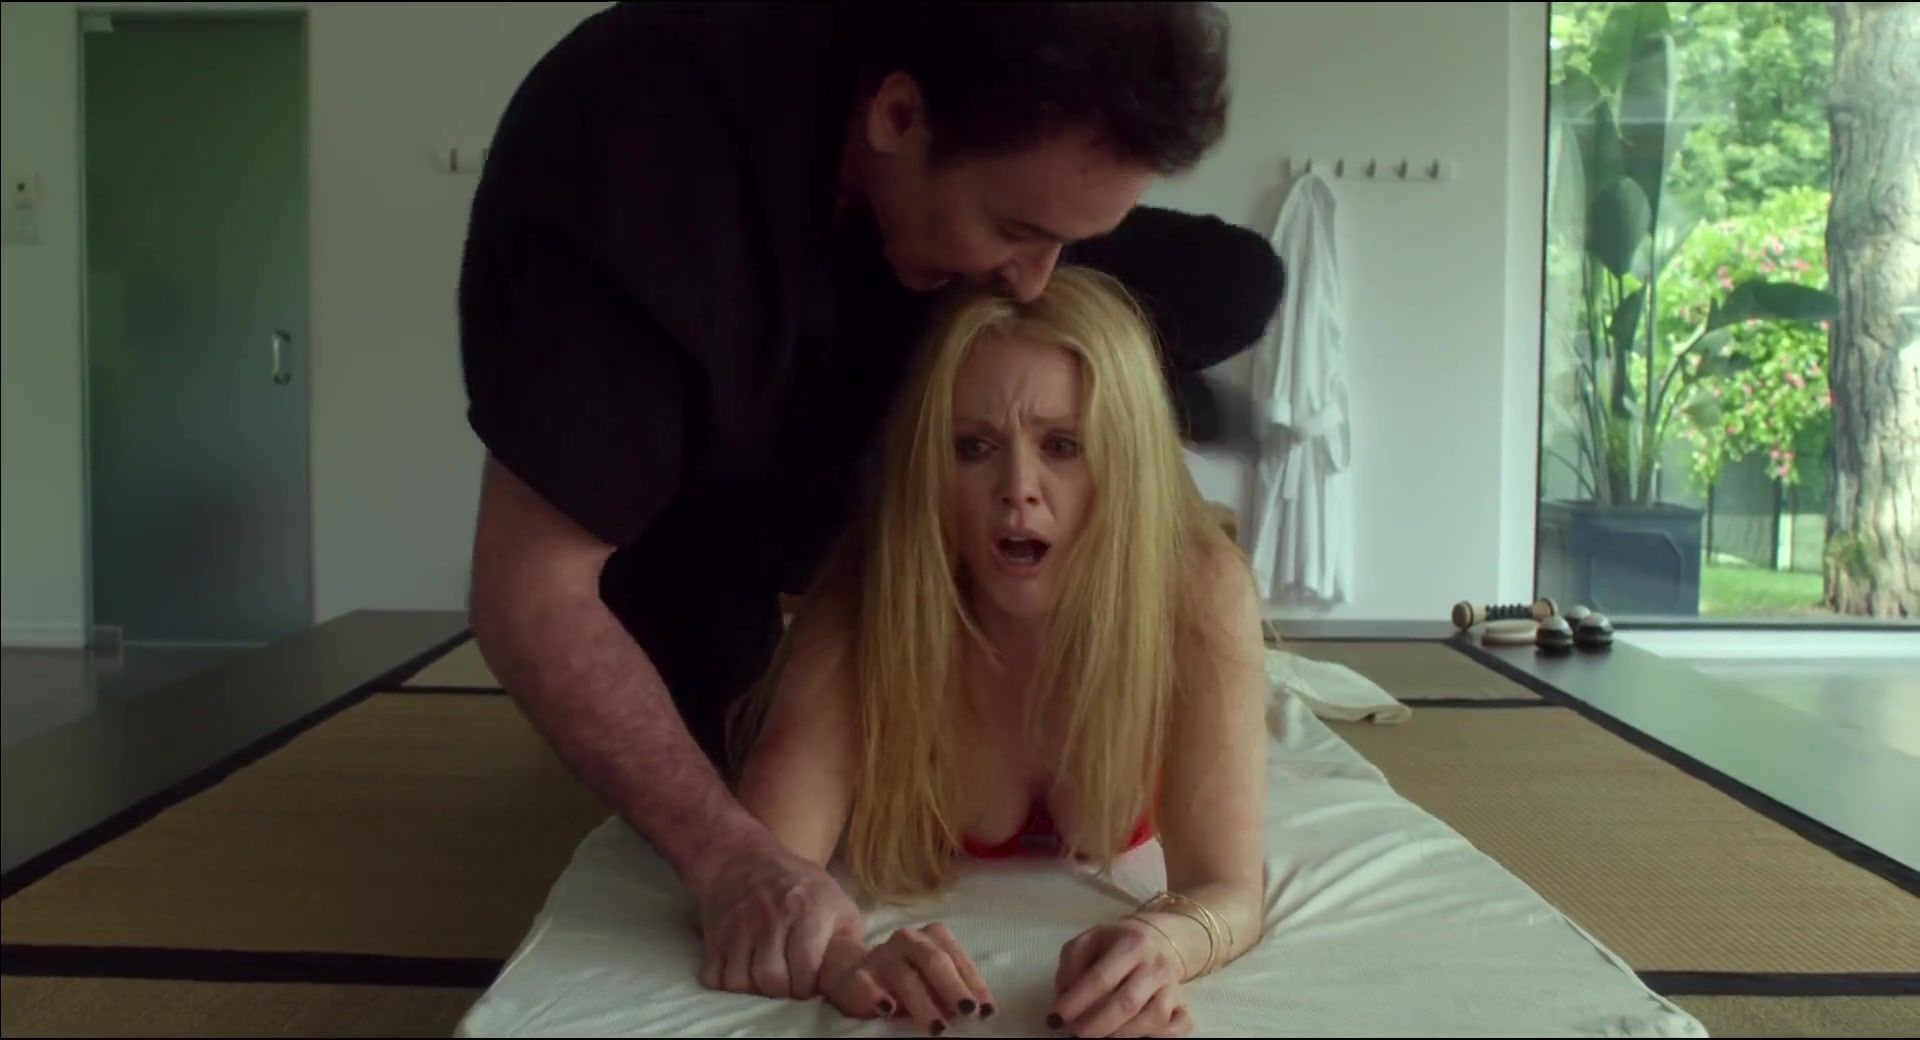 Calcinha Submission video & Lesbian Celebs Scene | Celebrity: Julianne Moore nude | The movie "Maps to the Stars" Pure 18 - 1